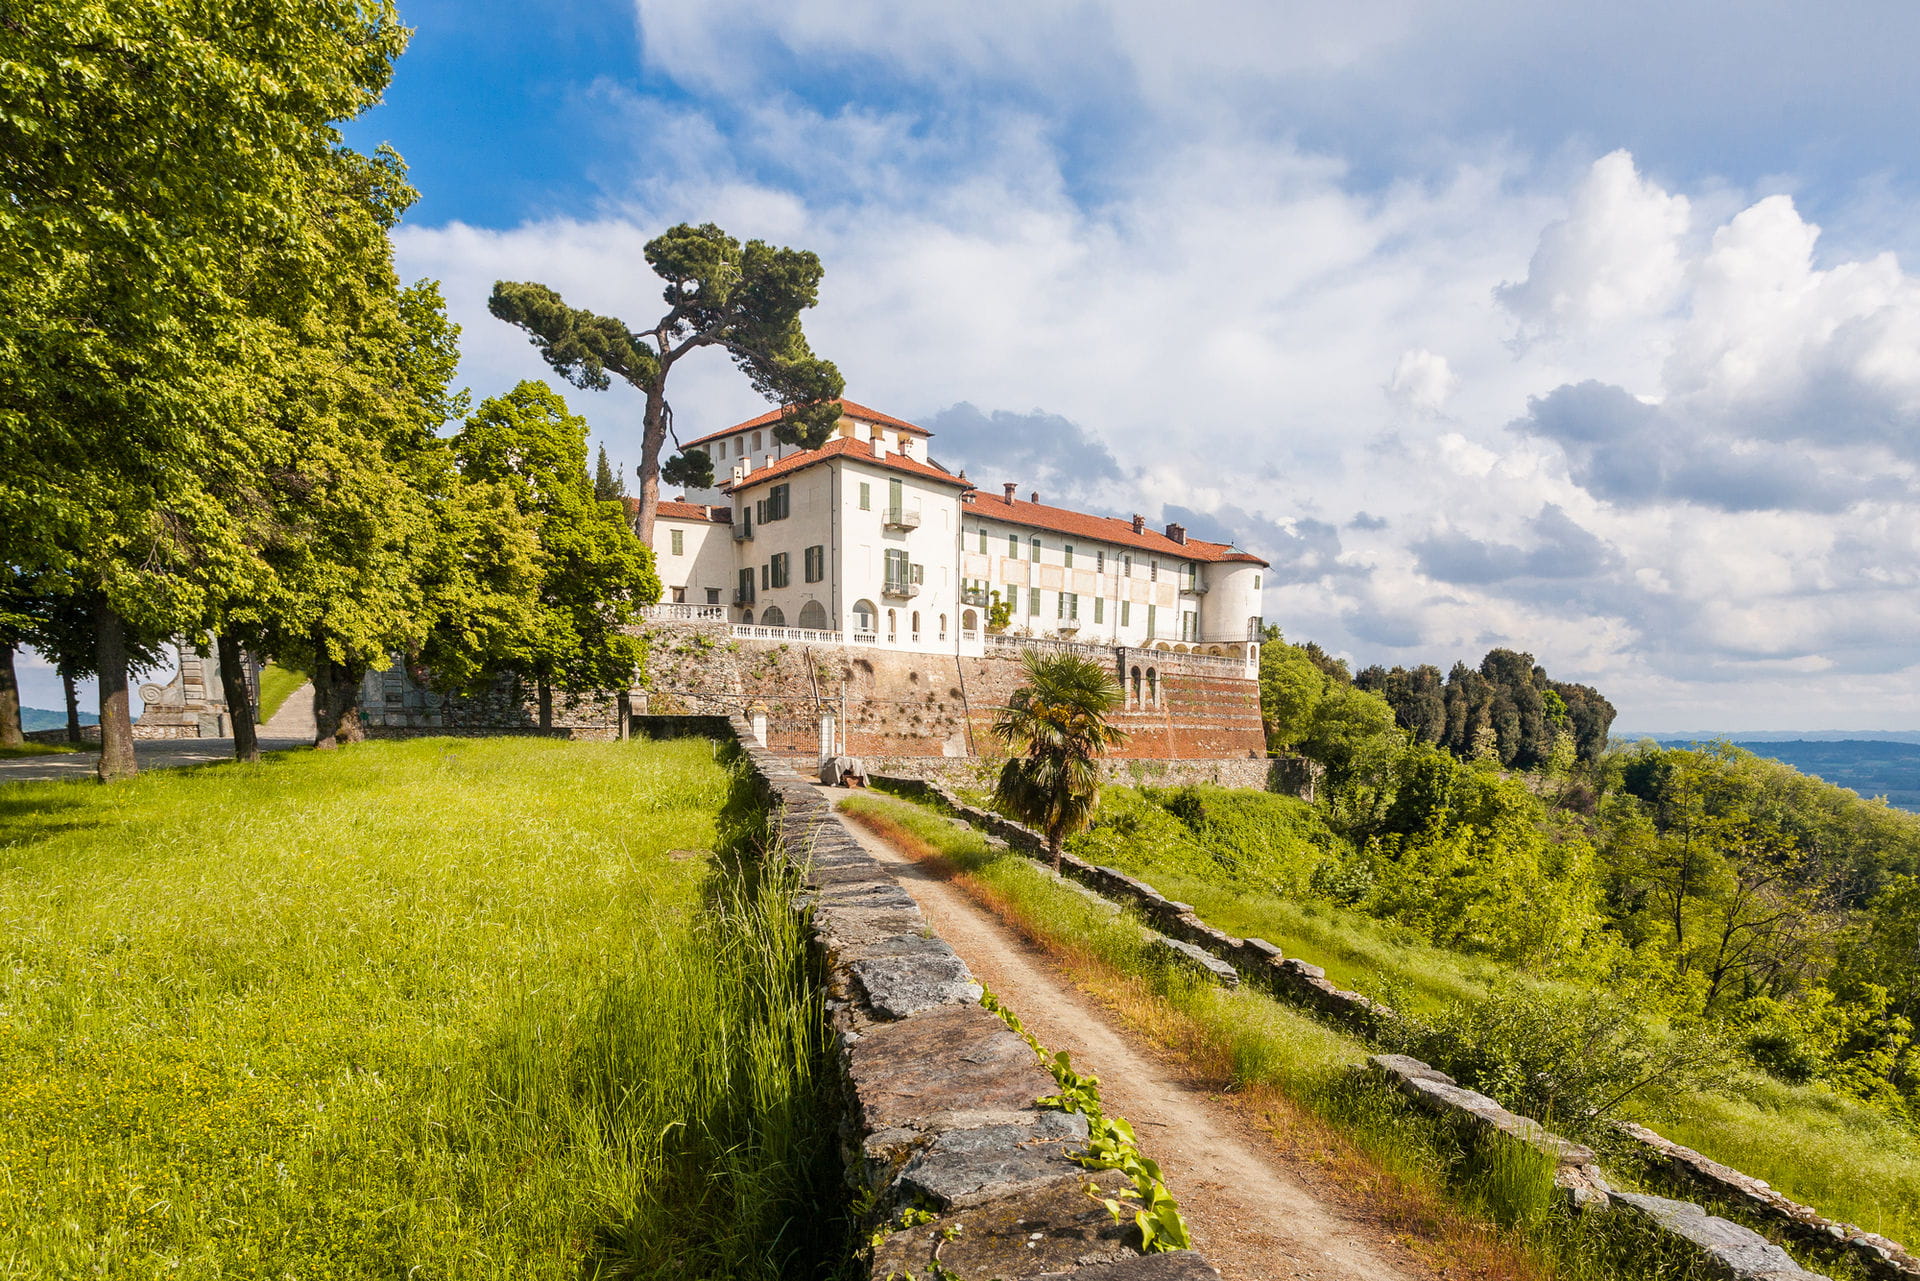 High quality hoto of Masino Castle - Italy